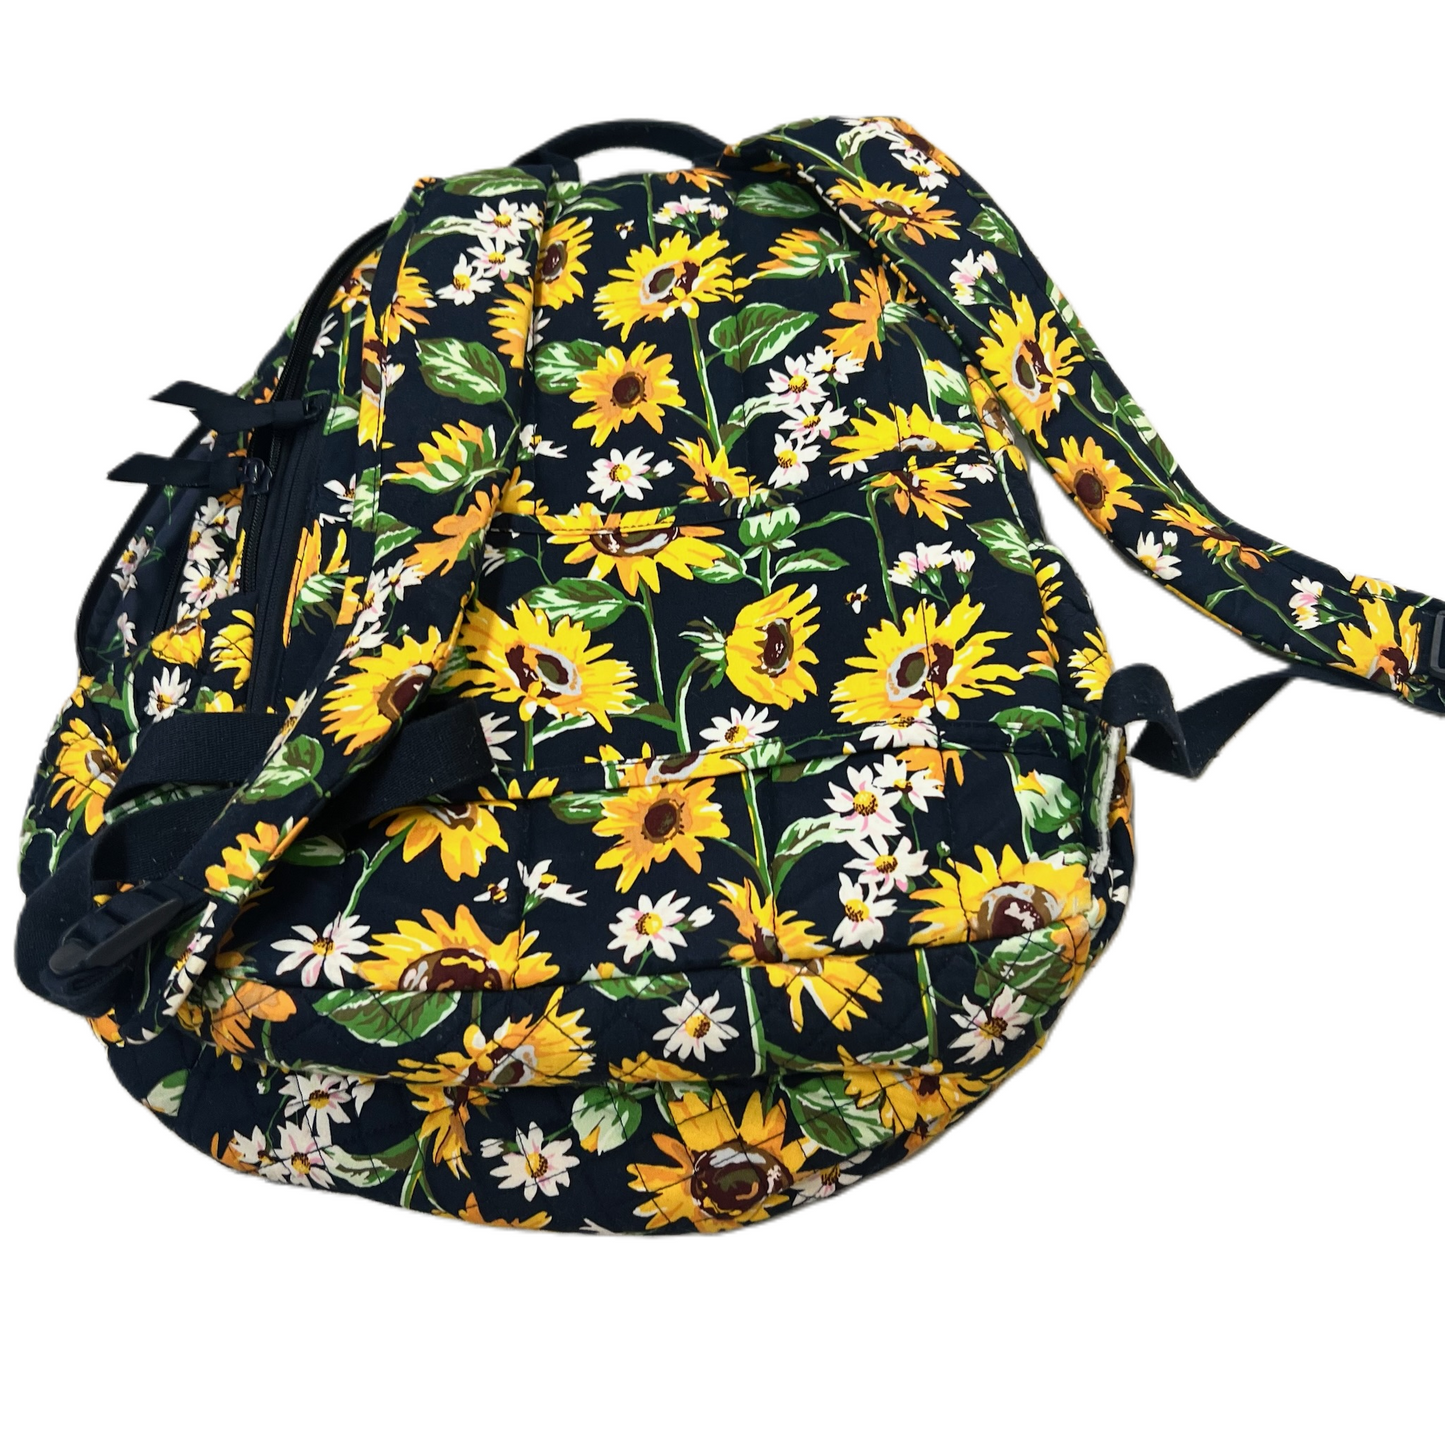 Backpack By Vera Bradley, Size: Large